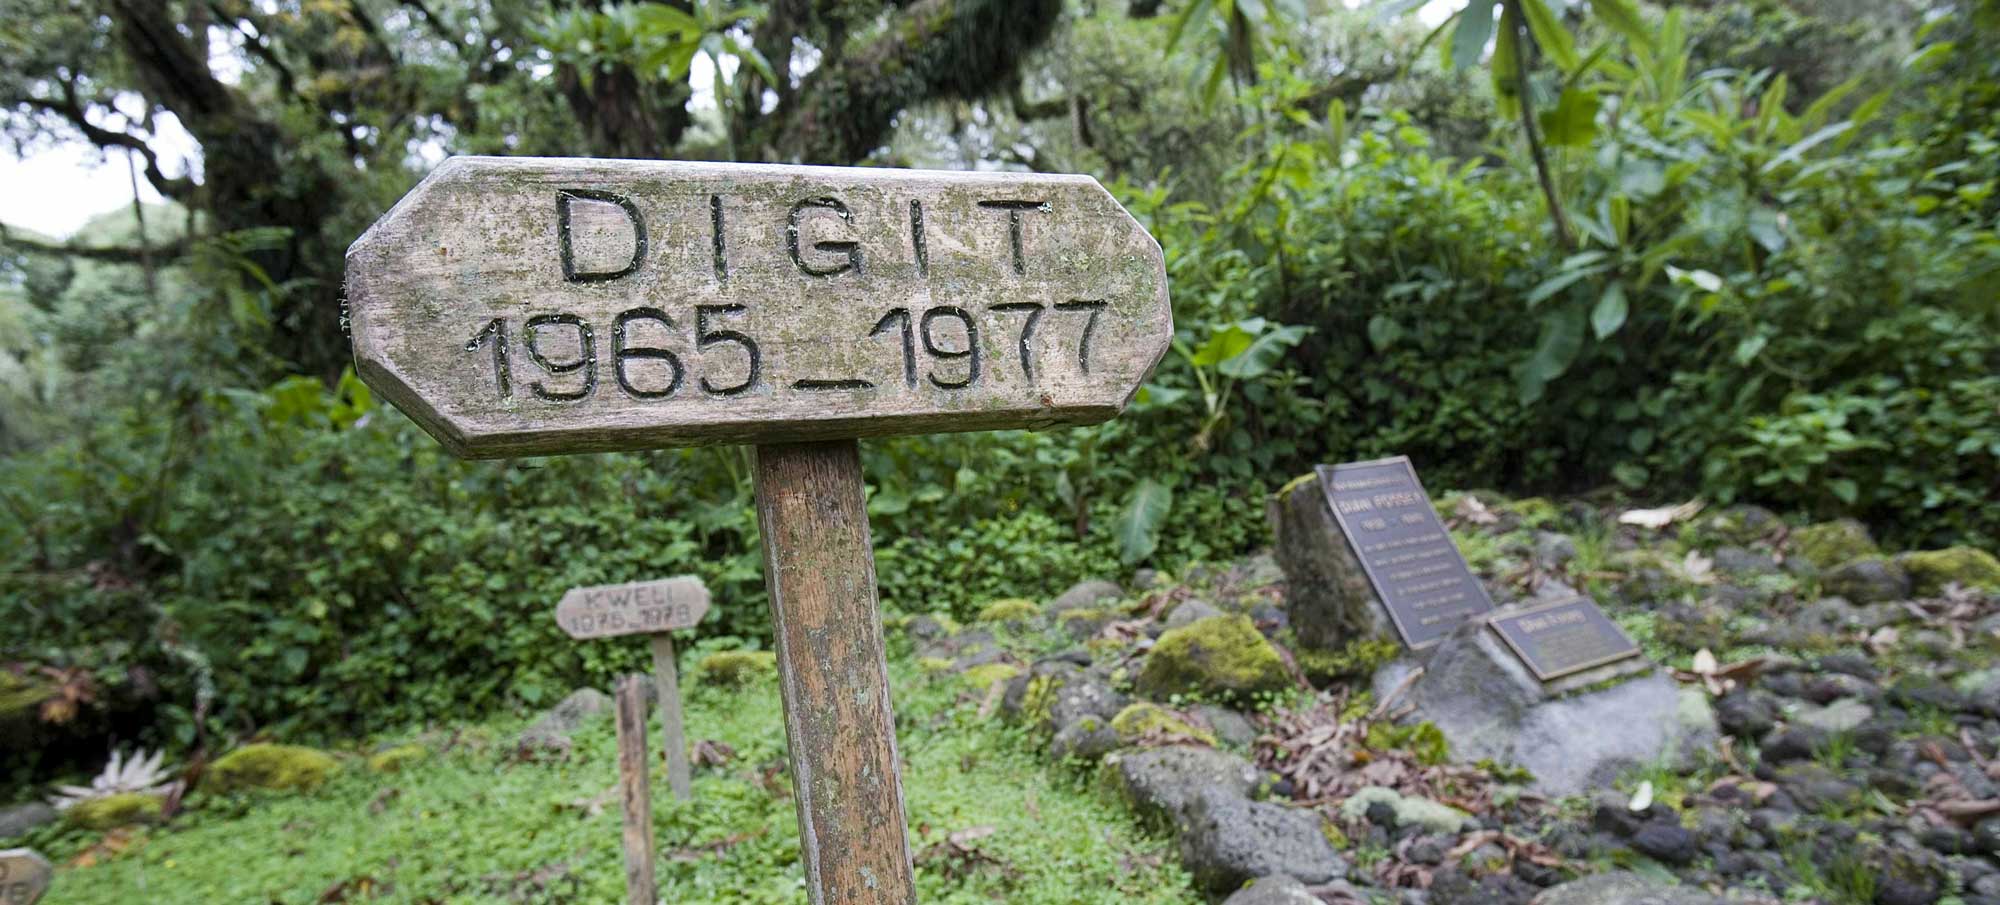 Dian Fossey is buried next to the grave of her favourite gorilla Digit